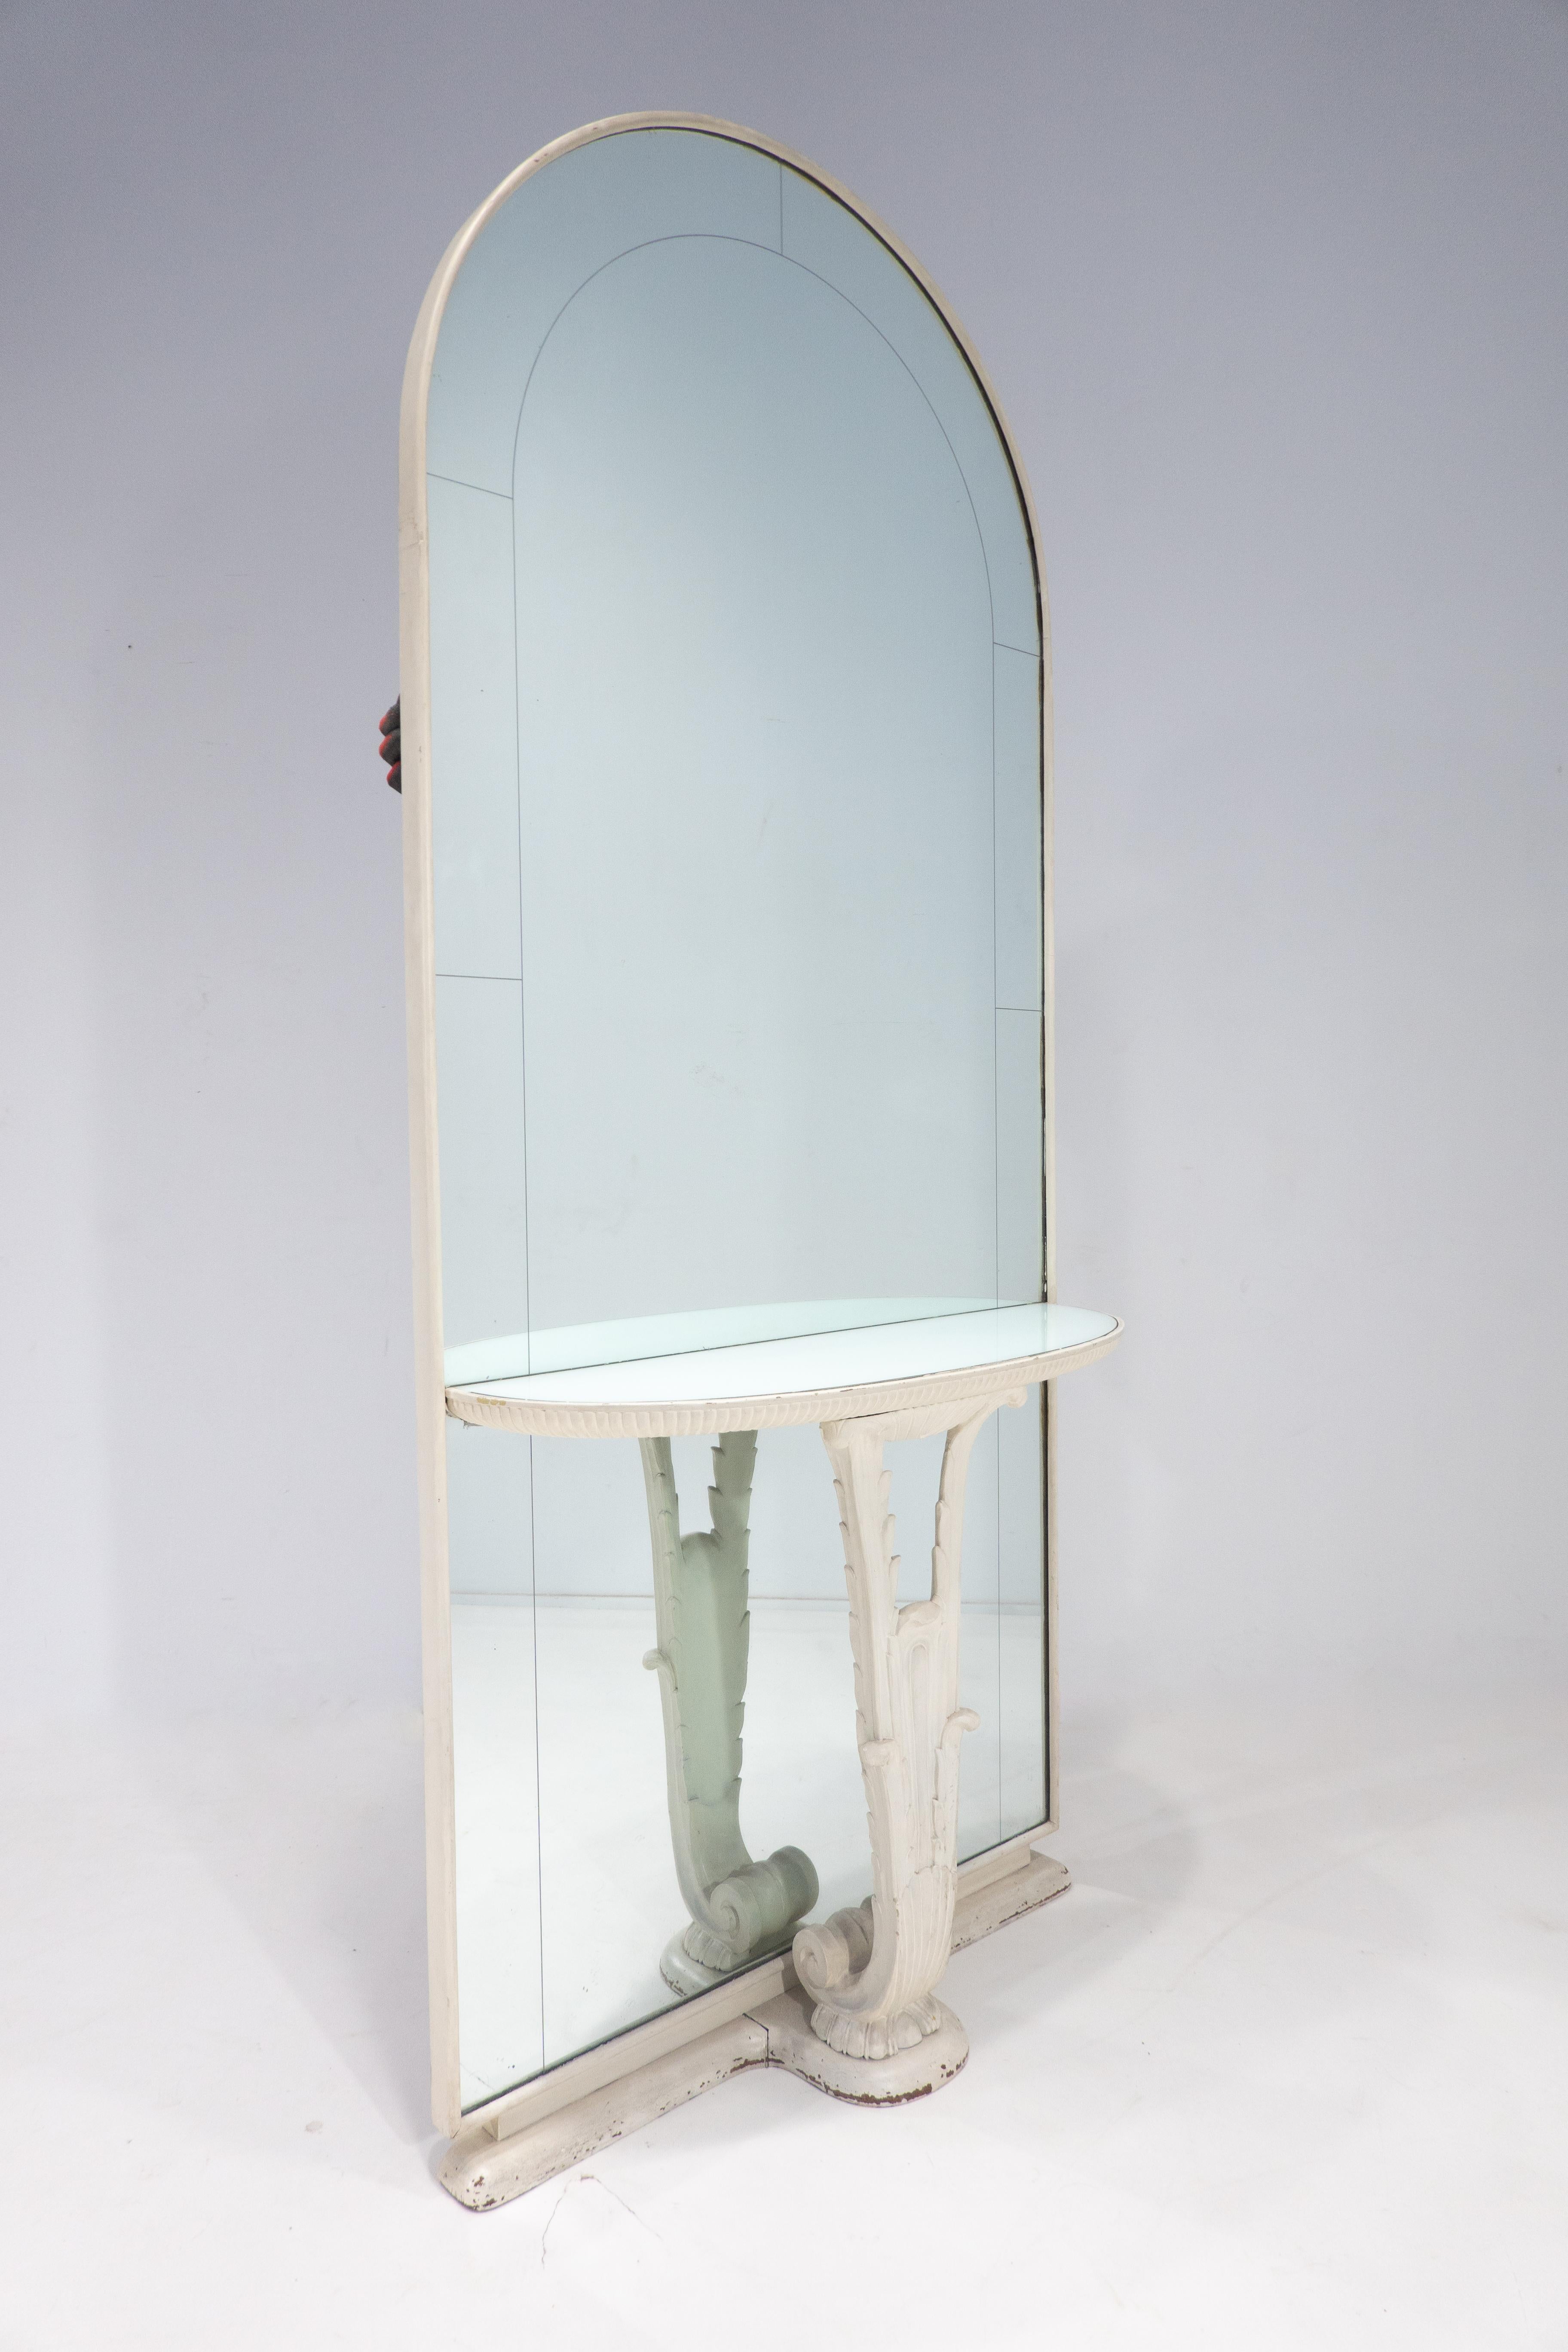 Mid-20th Century Italian Console Mirror, Wood and Glass, Borsani Style, 1940s For Sale